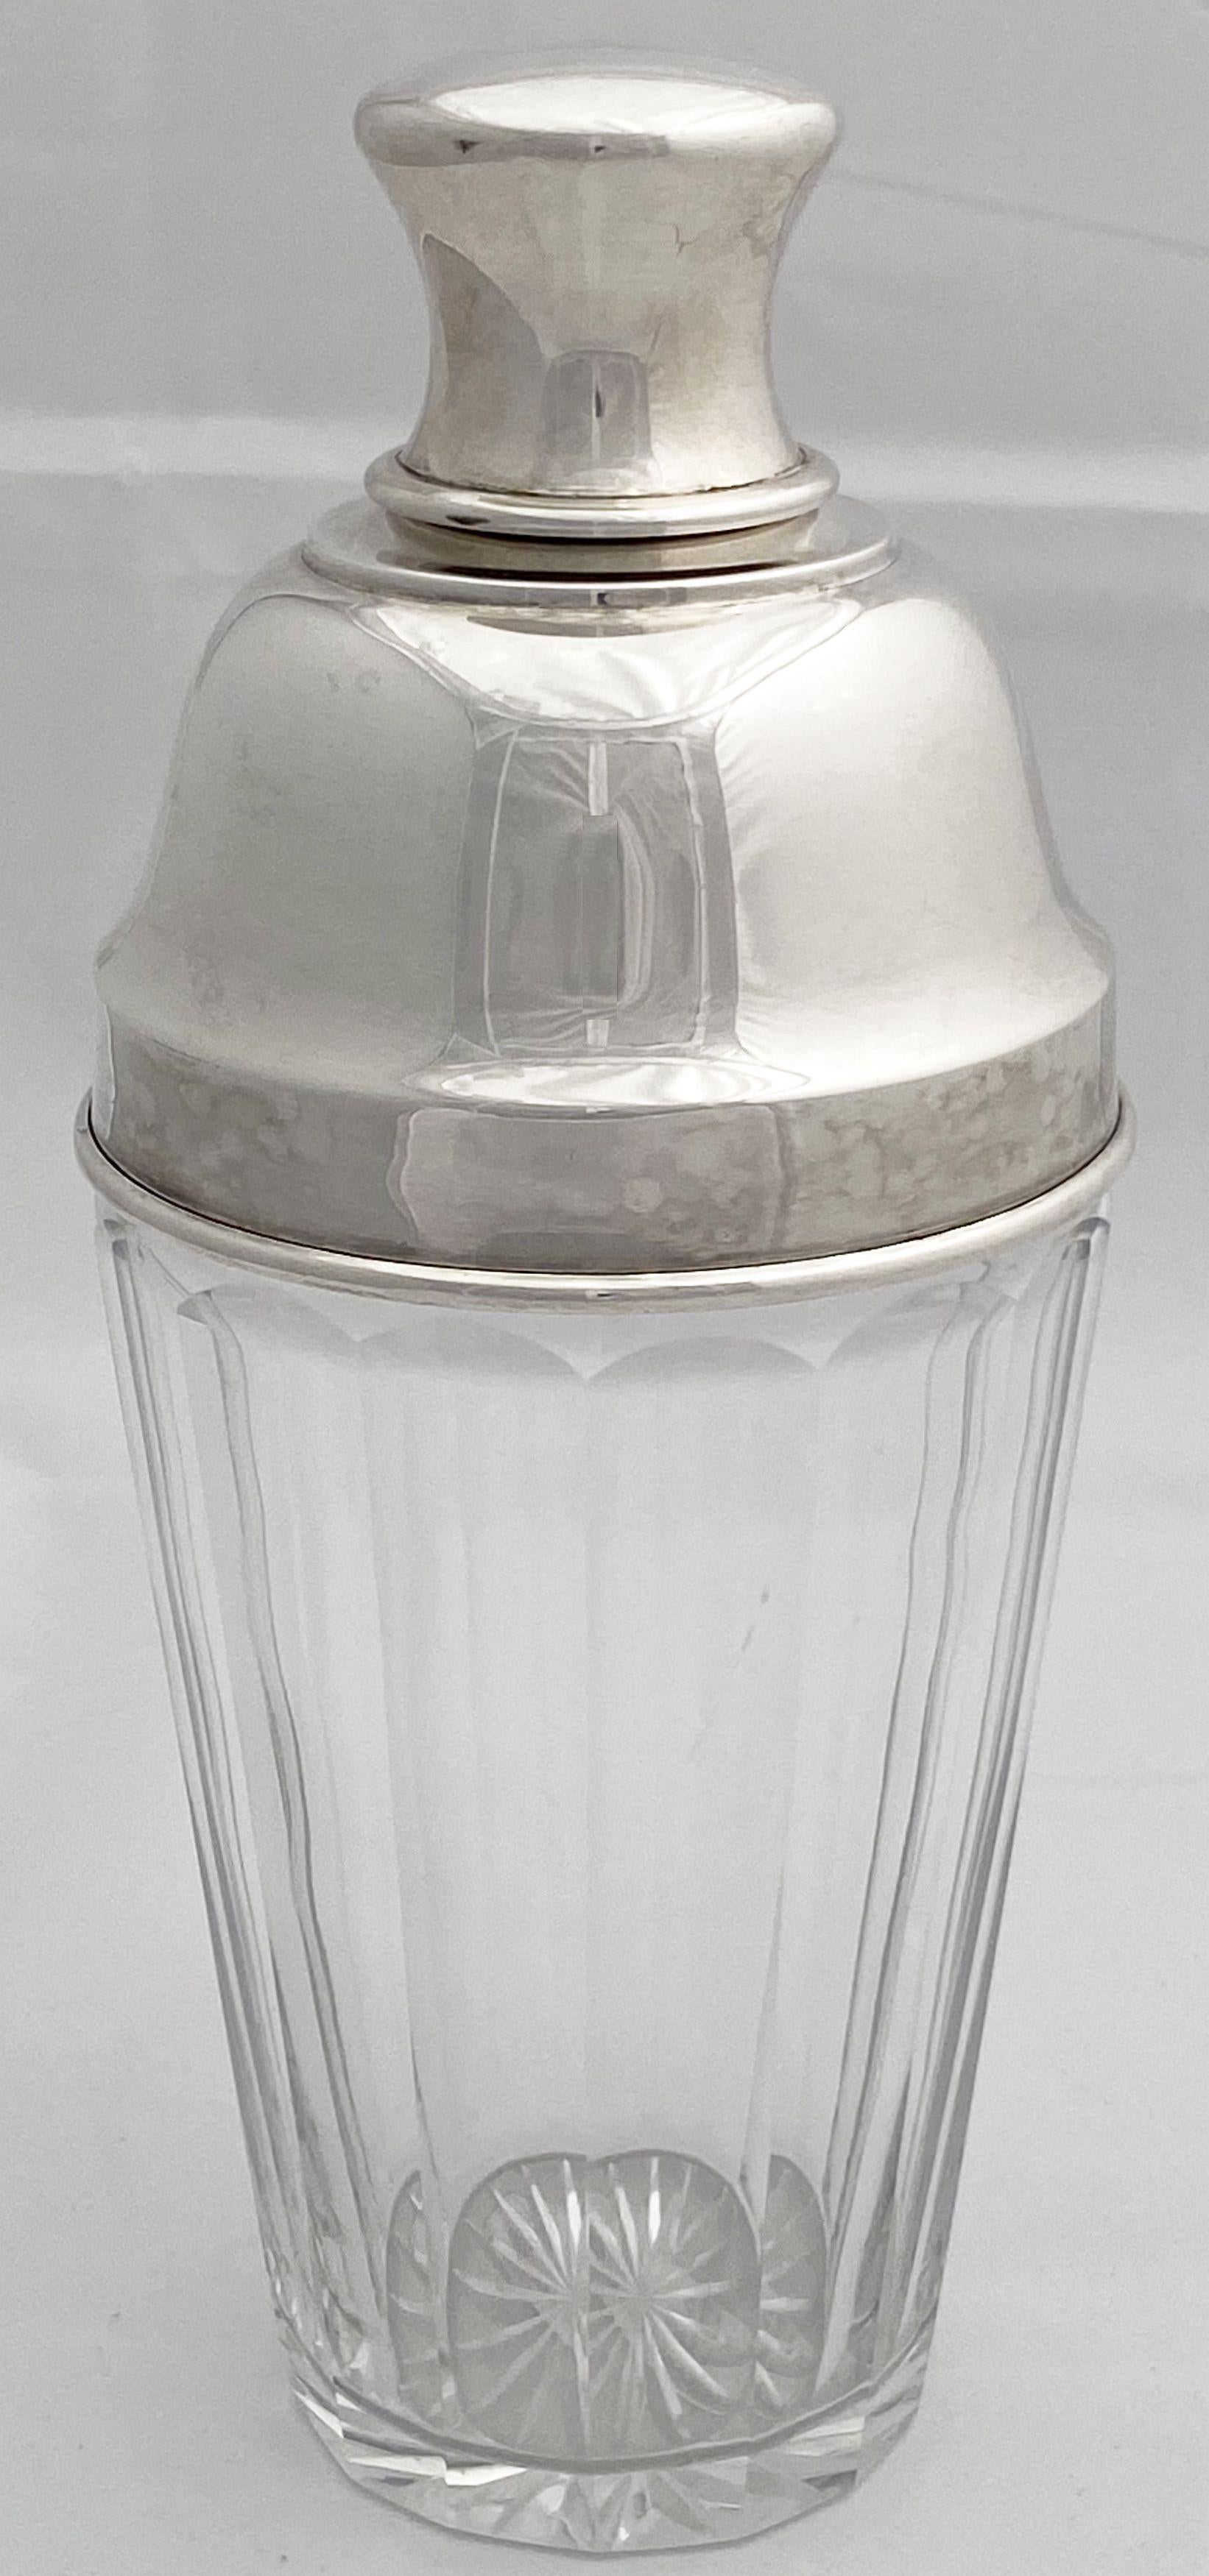 Metal Art Deco Martini or Cocktail Shaker from England